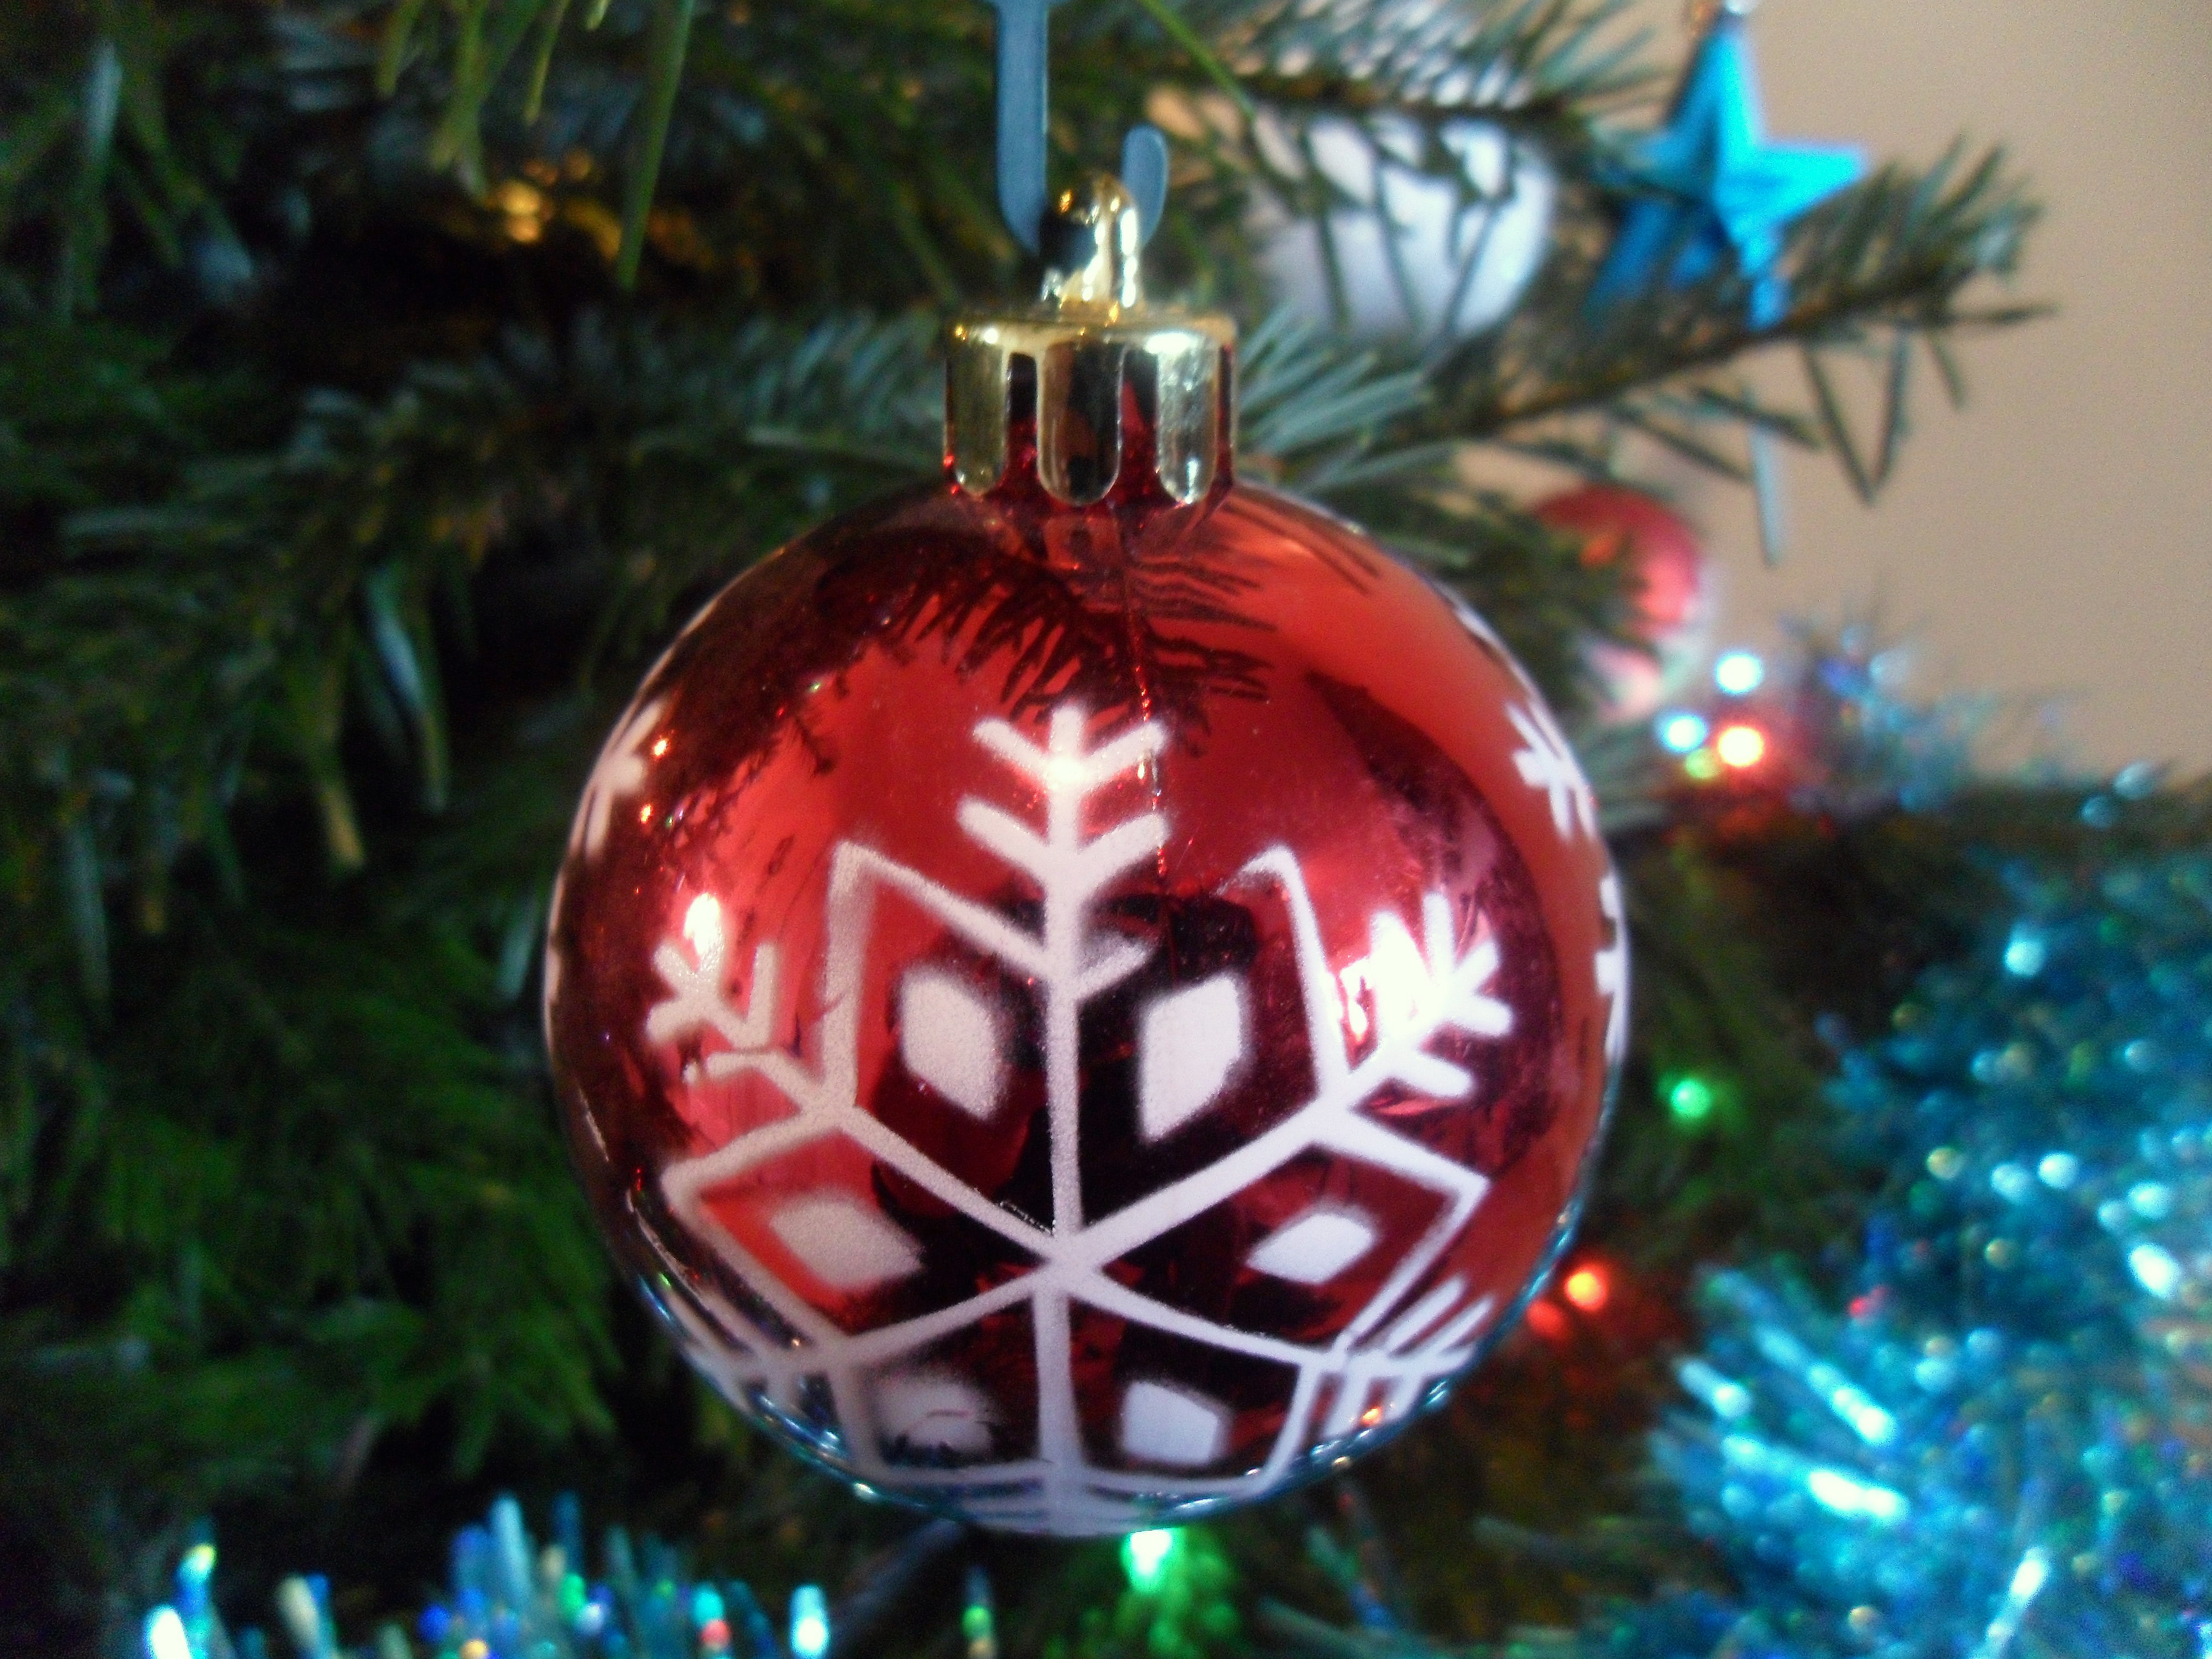 Free Stock Photos of Christmas Bauble Tree Trimmings